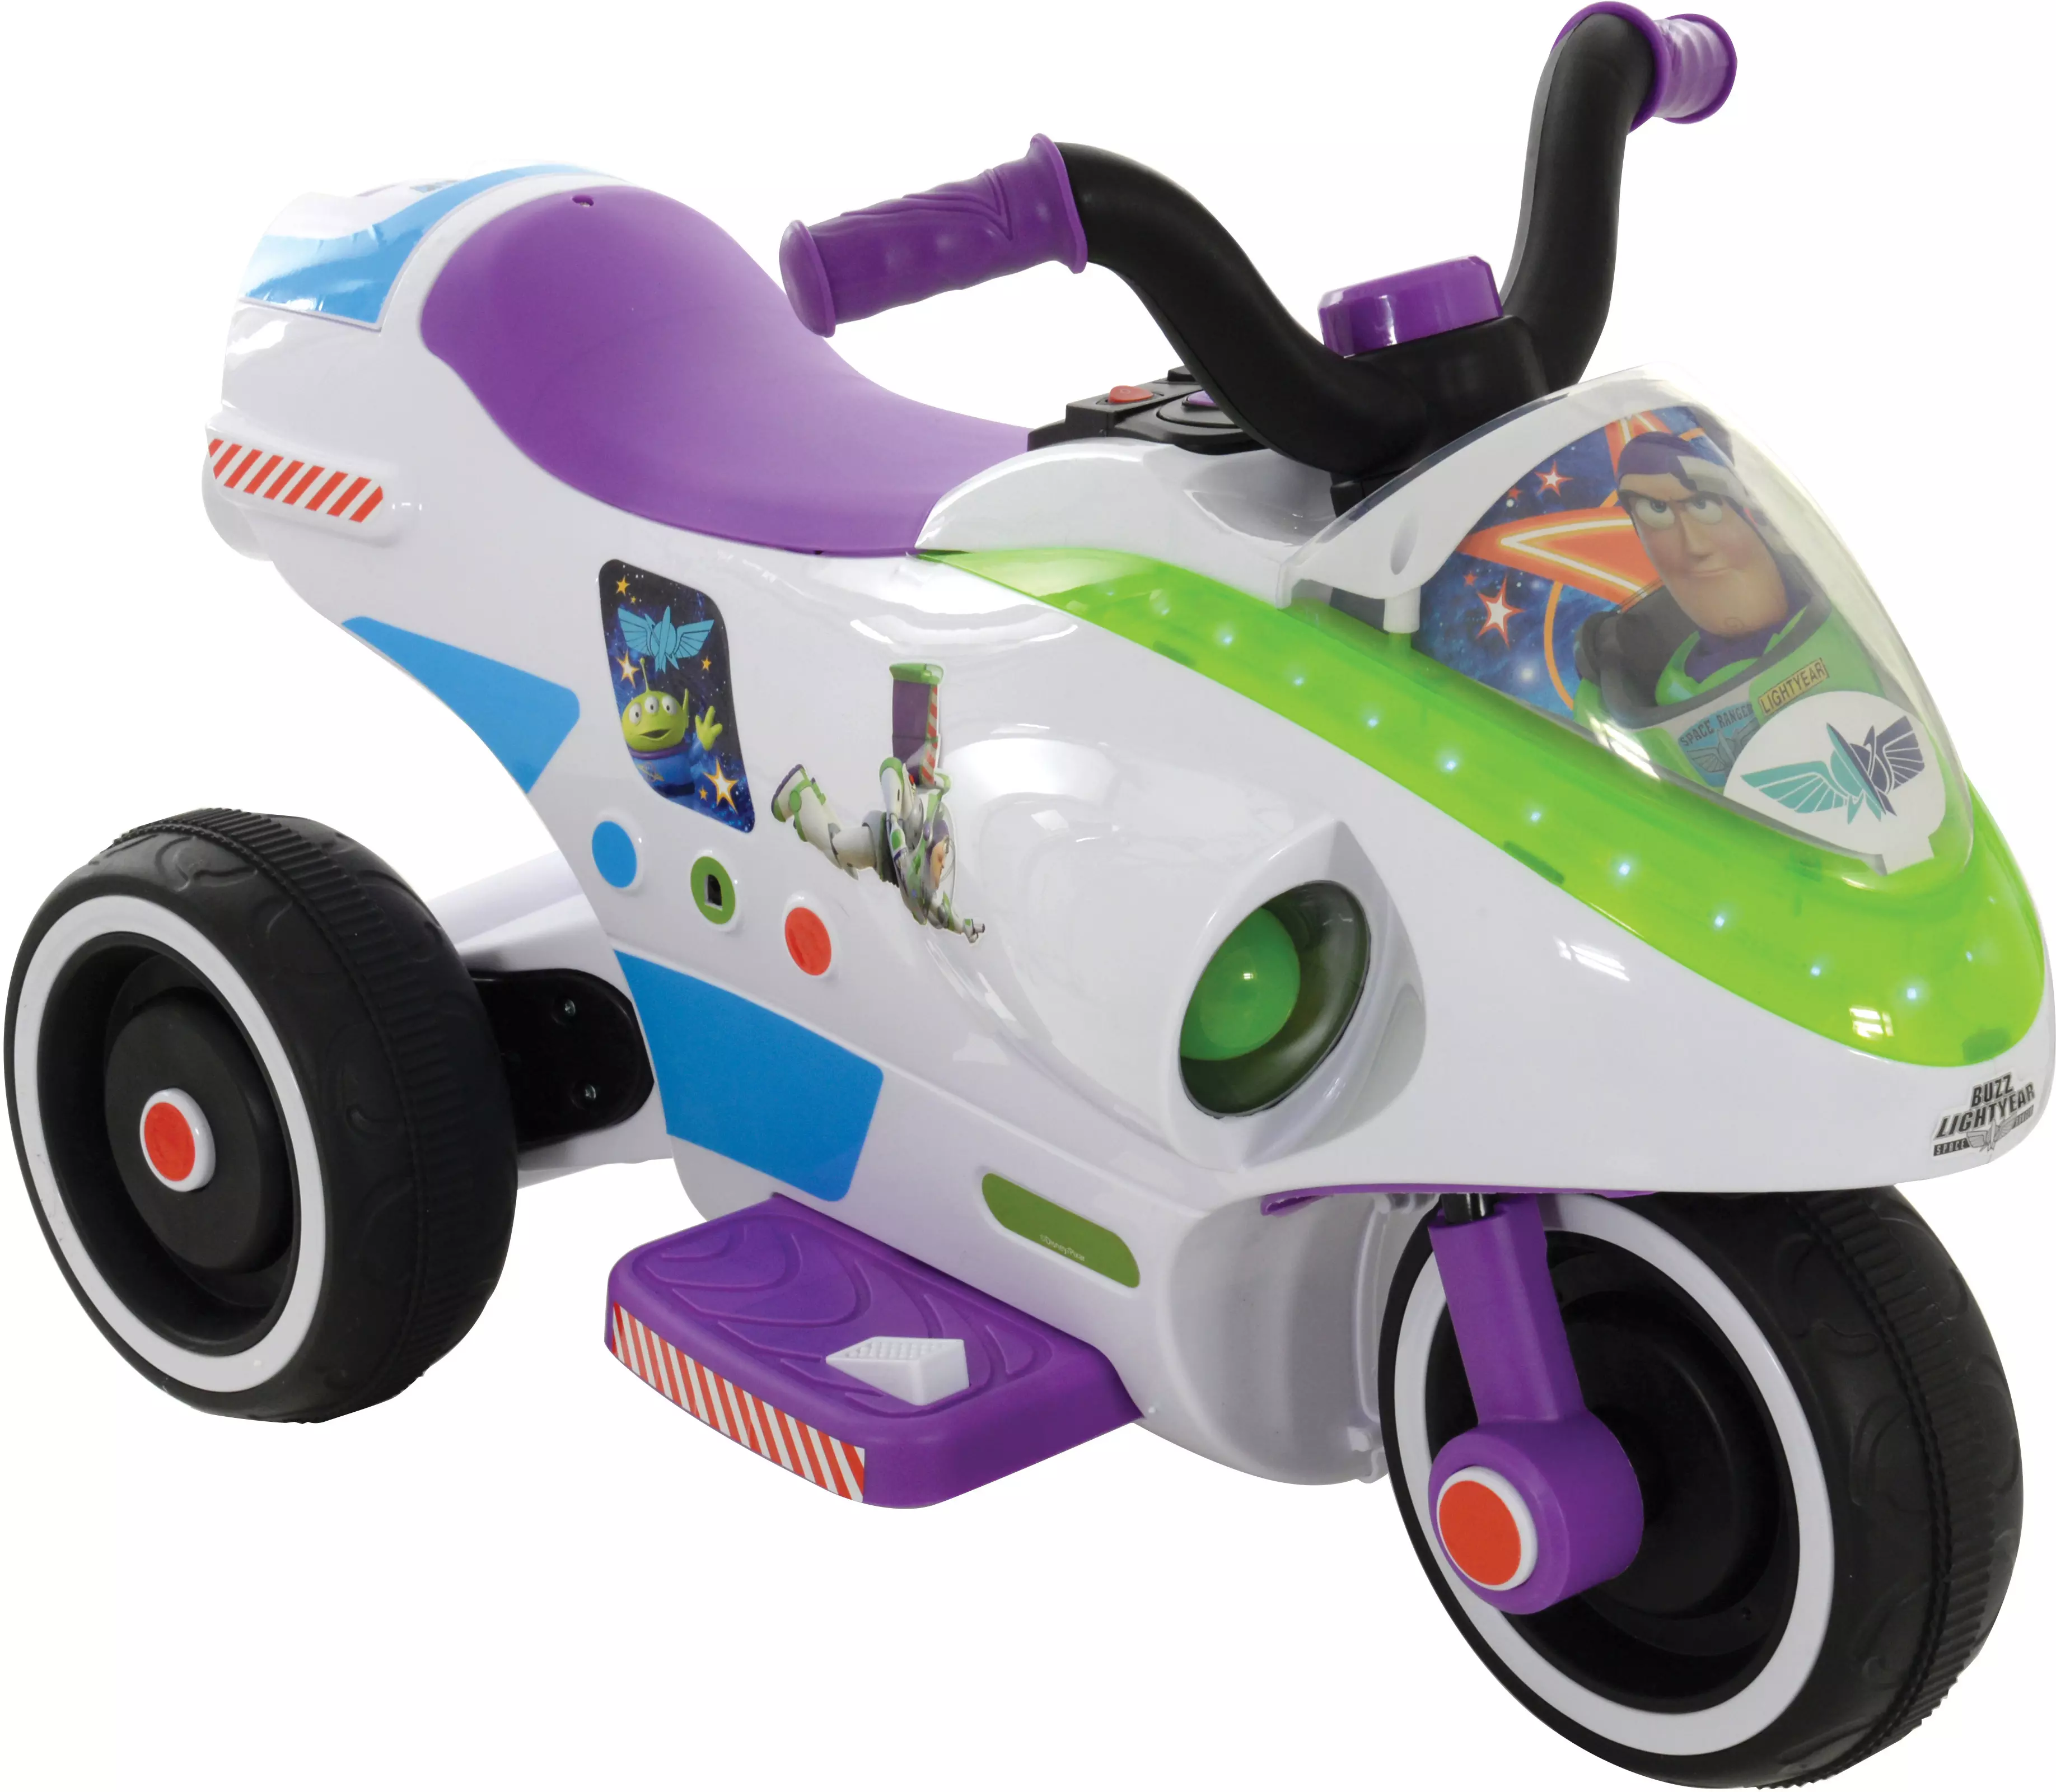 halfords childrens electric cars